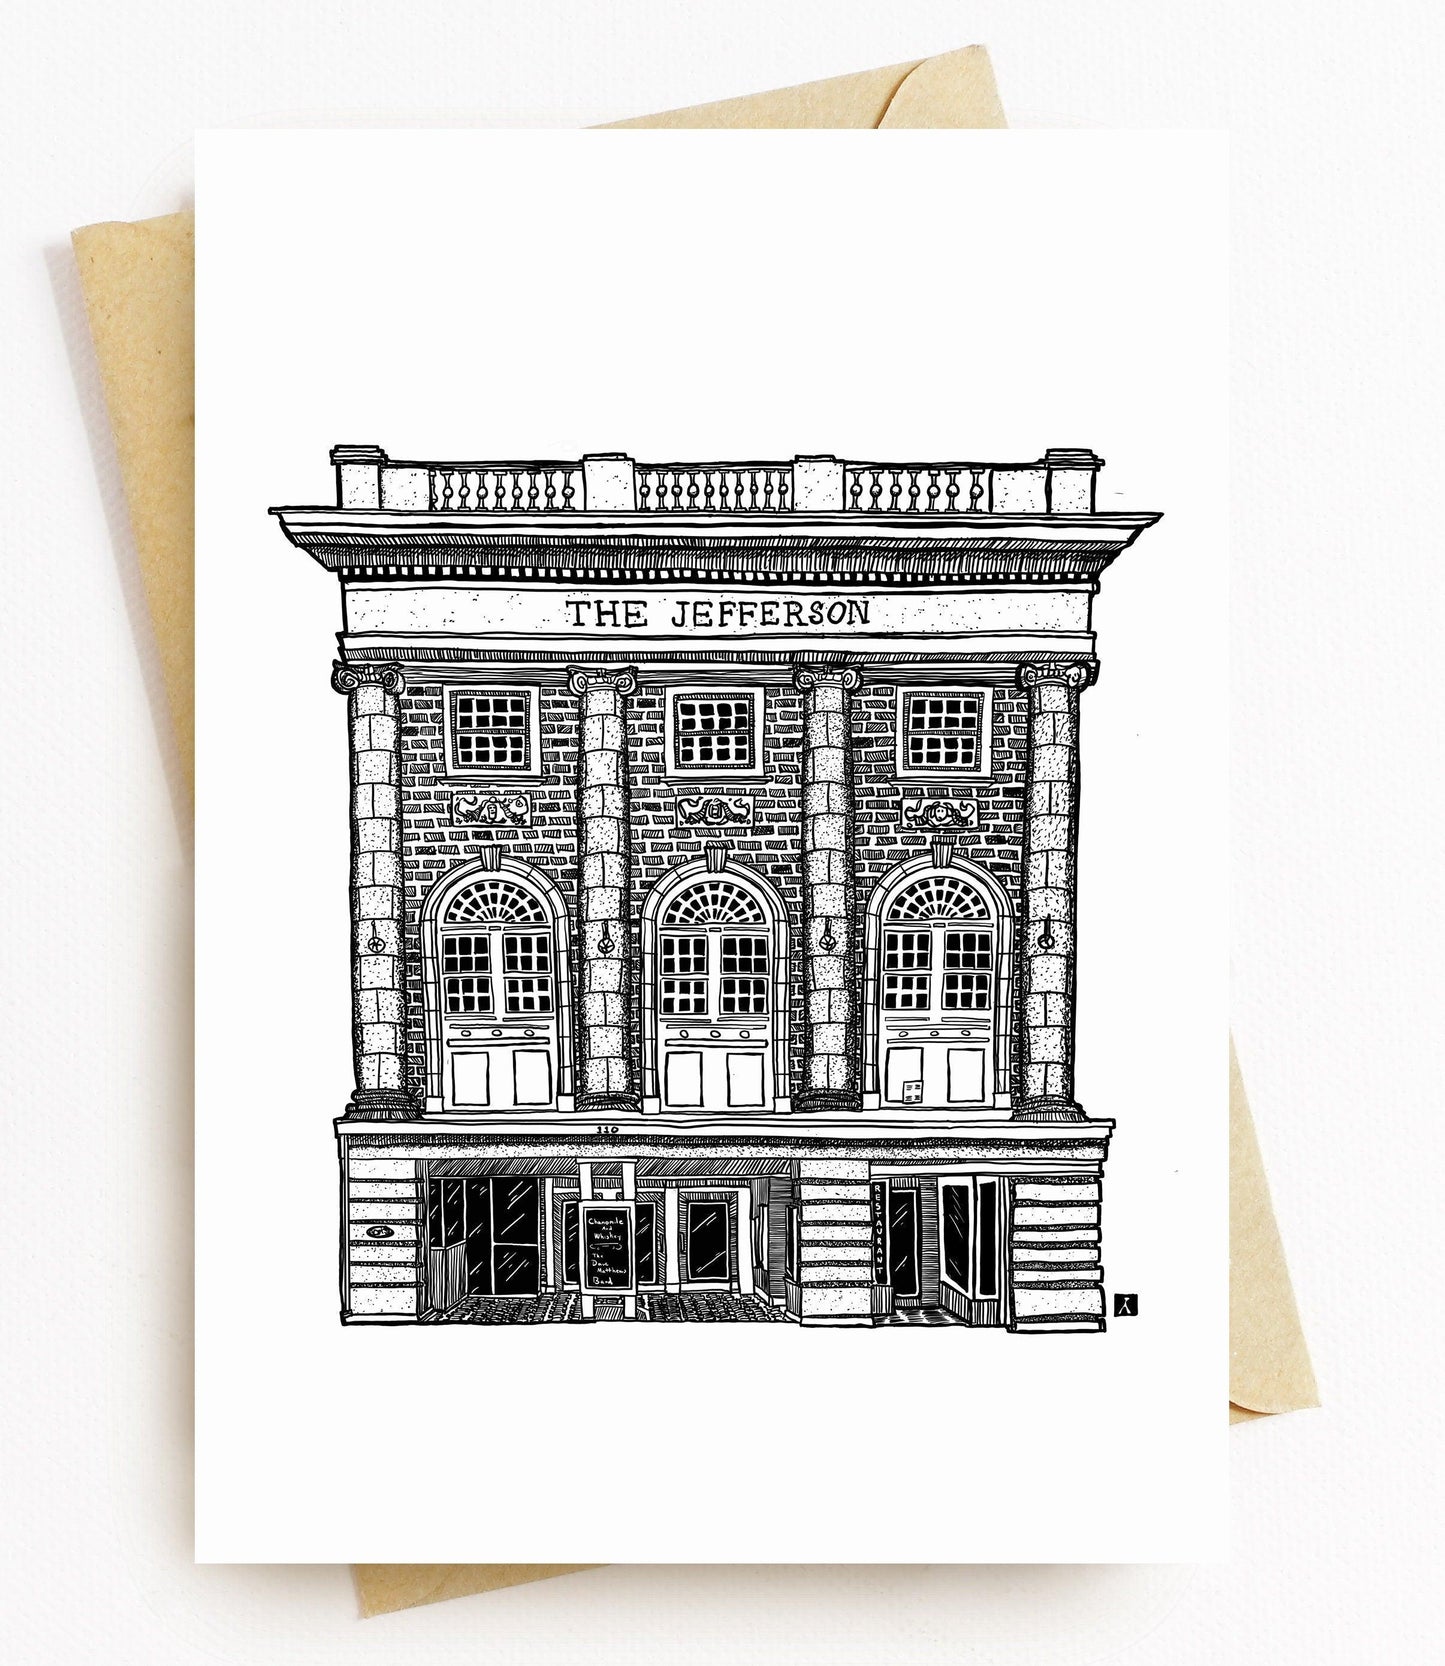 BellavanceInk: Greeting Card With A Pen & Ink Drawing Of The Jefferson Theater In Charlottesville 5 x 7 Inches - BellavanceInk